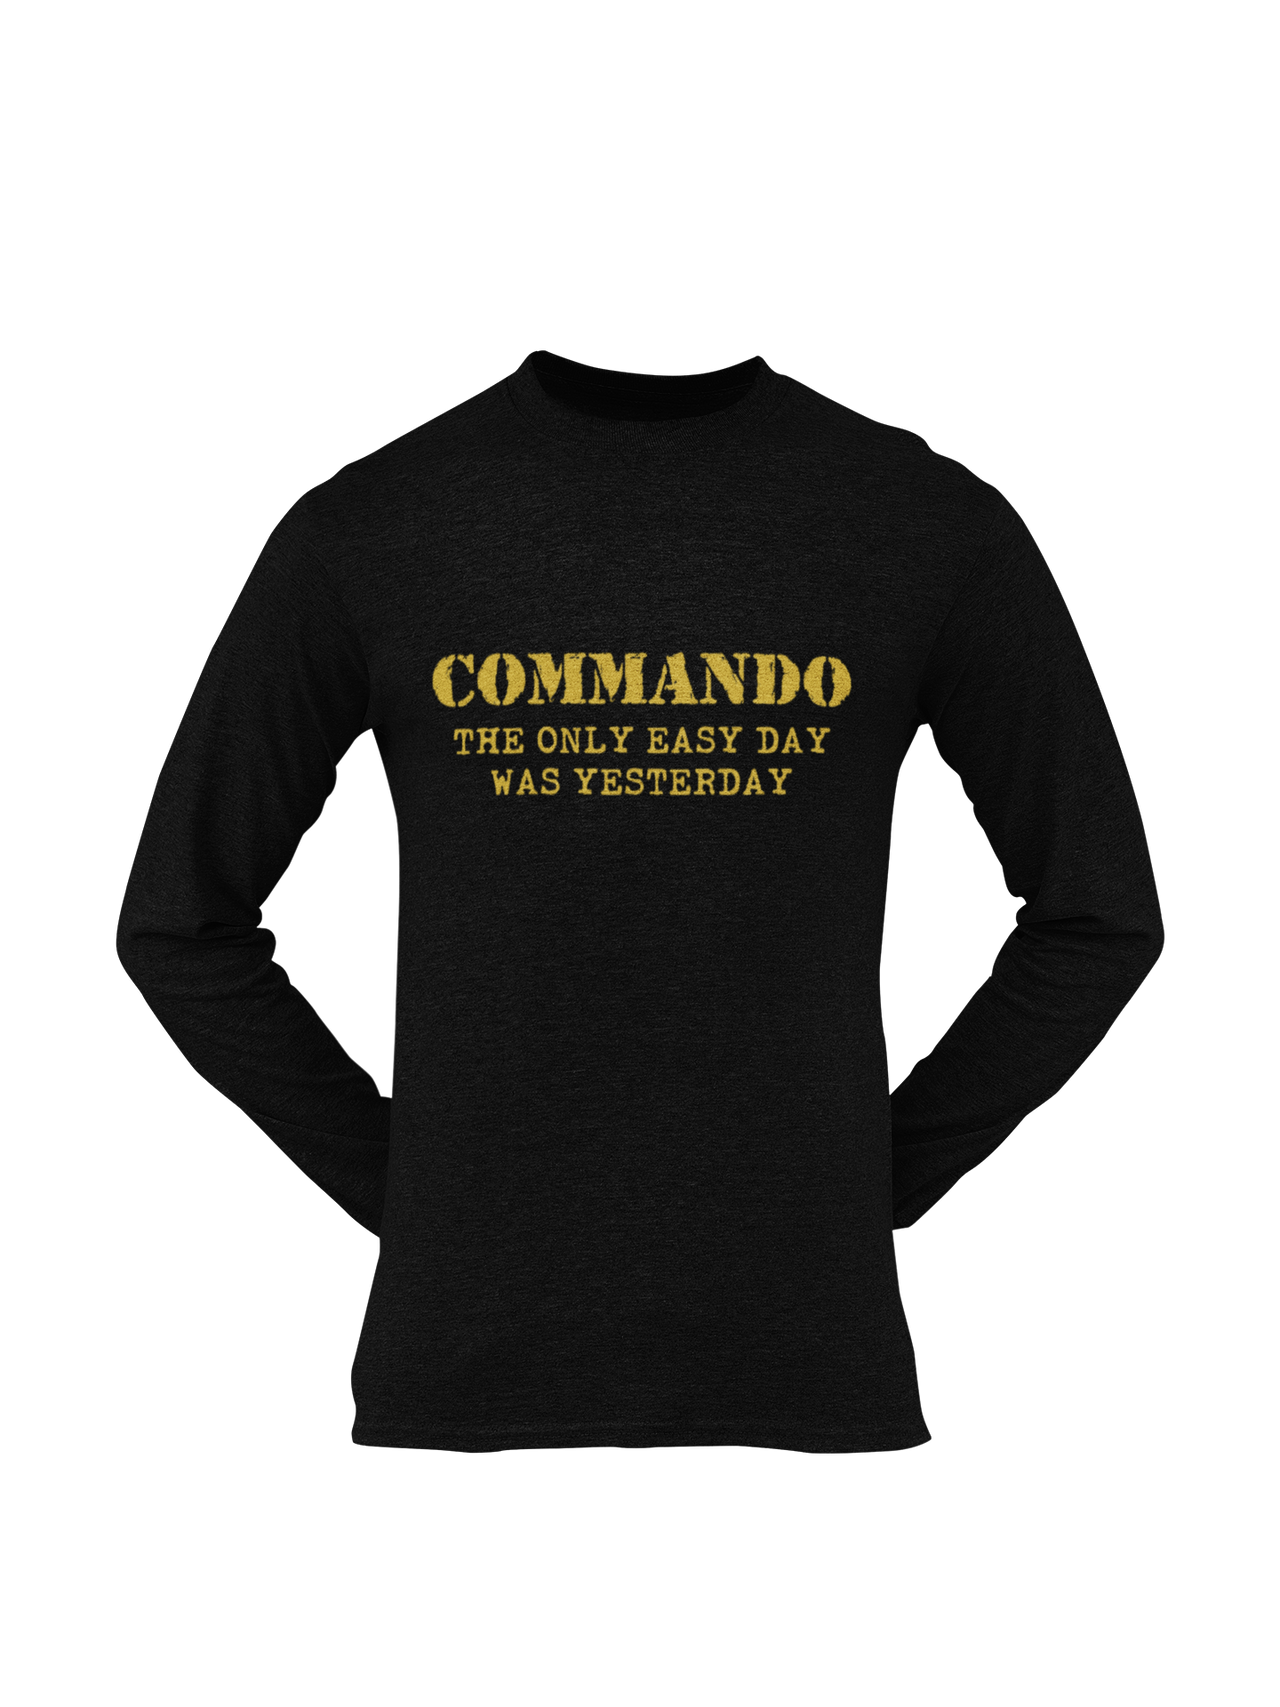 Commando T-shirt - Commando - The Only Easy Day Was Yesterday (Men)